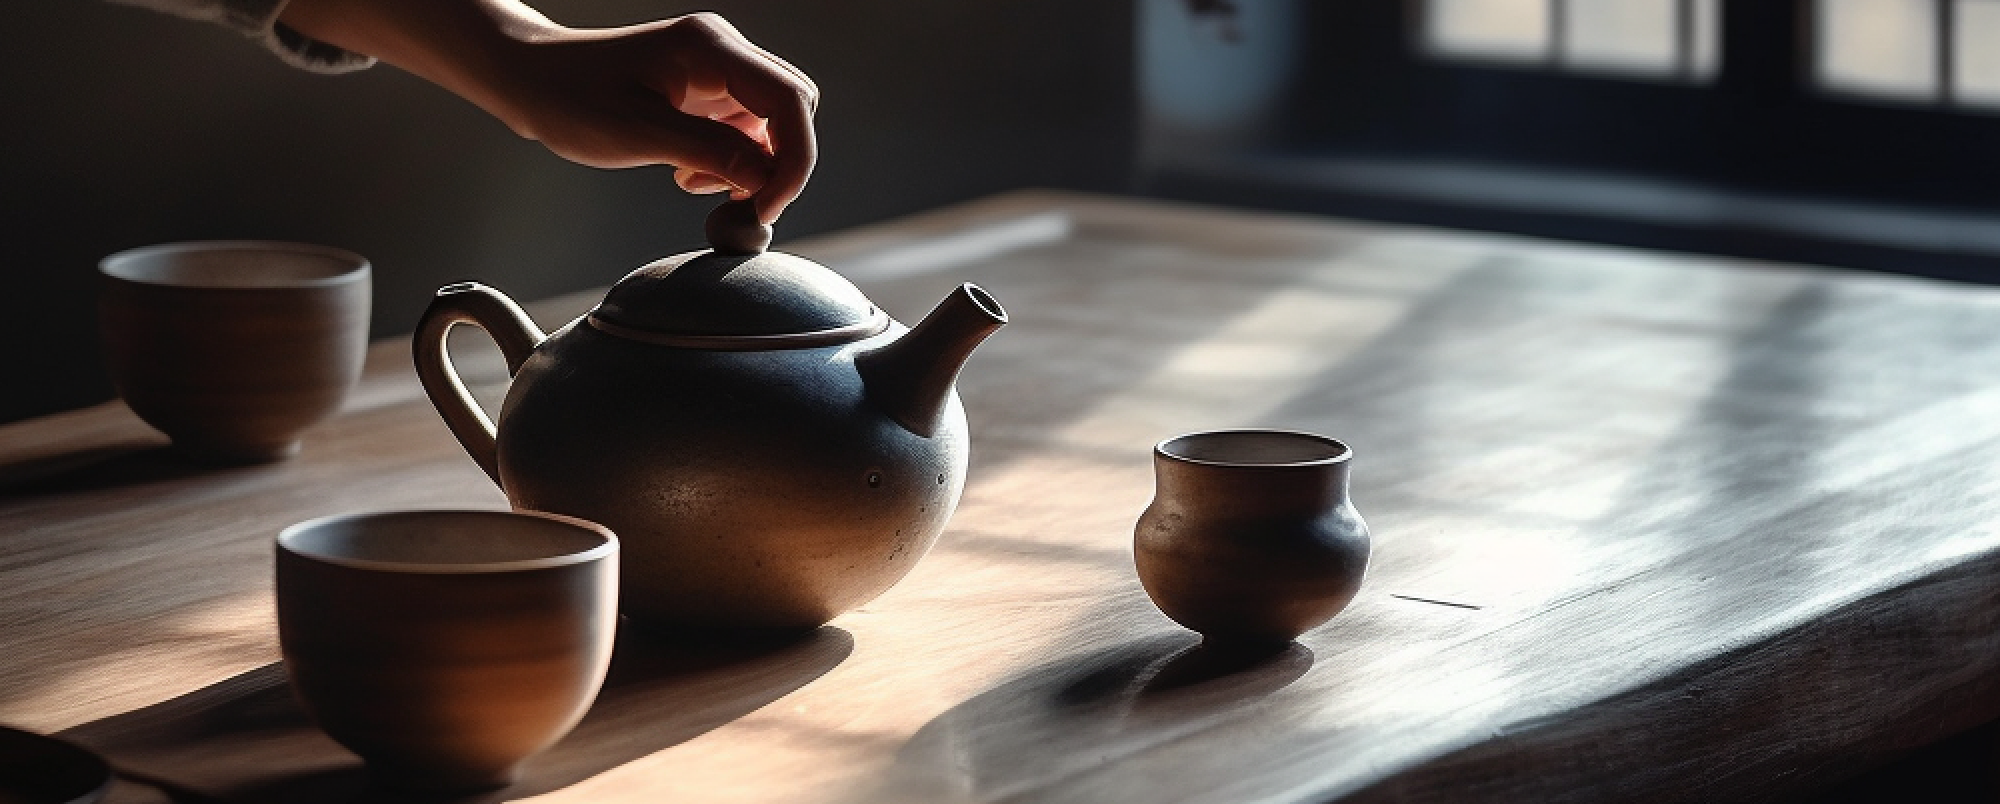 Finding the Perfect Tea Cup for Your Favorite Brew | Aermia | Embrace Beauty and Serenity